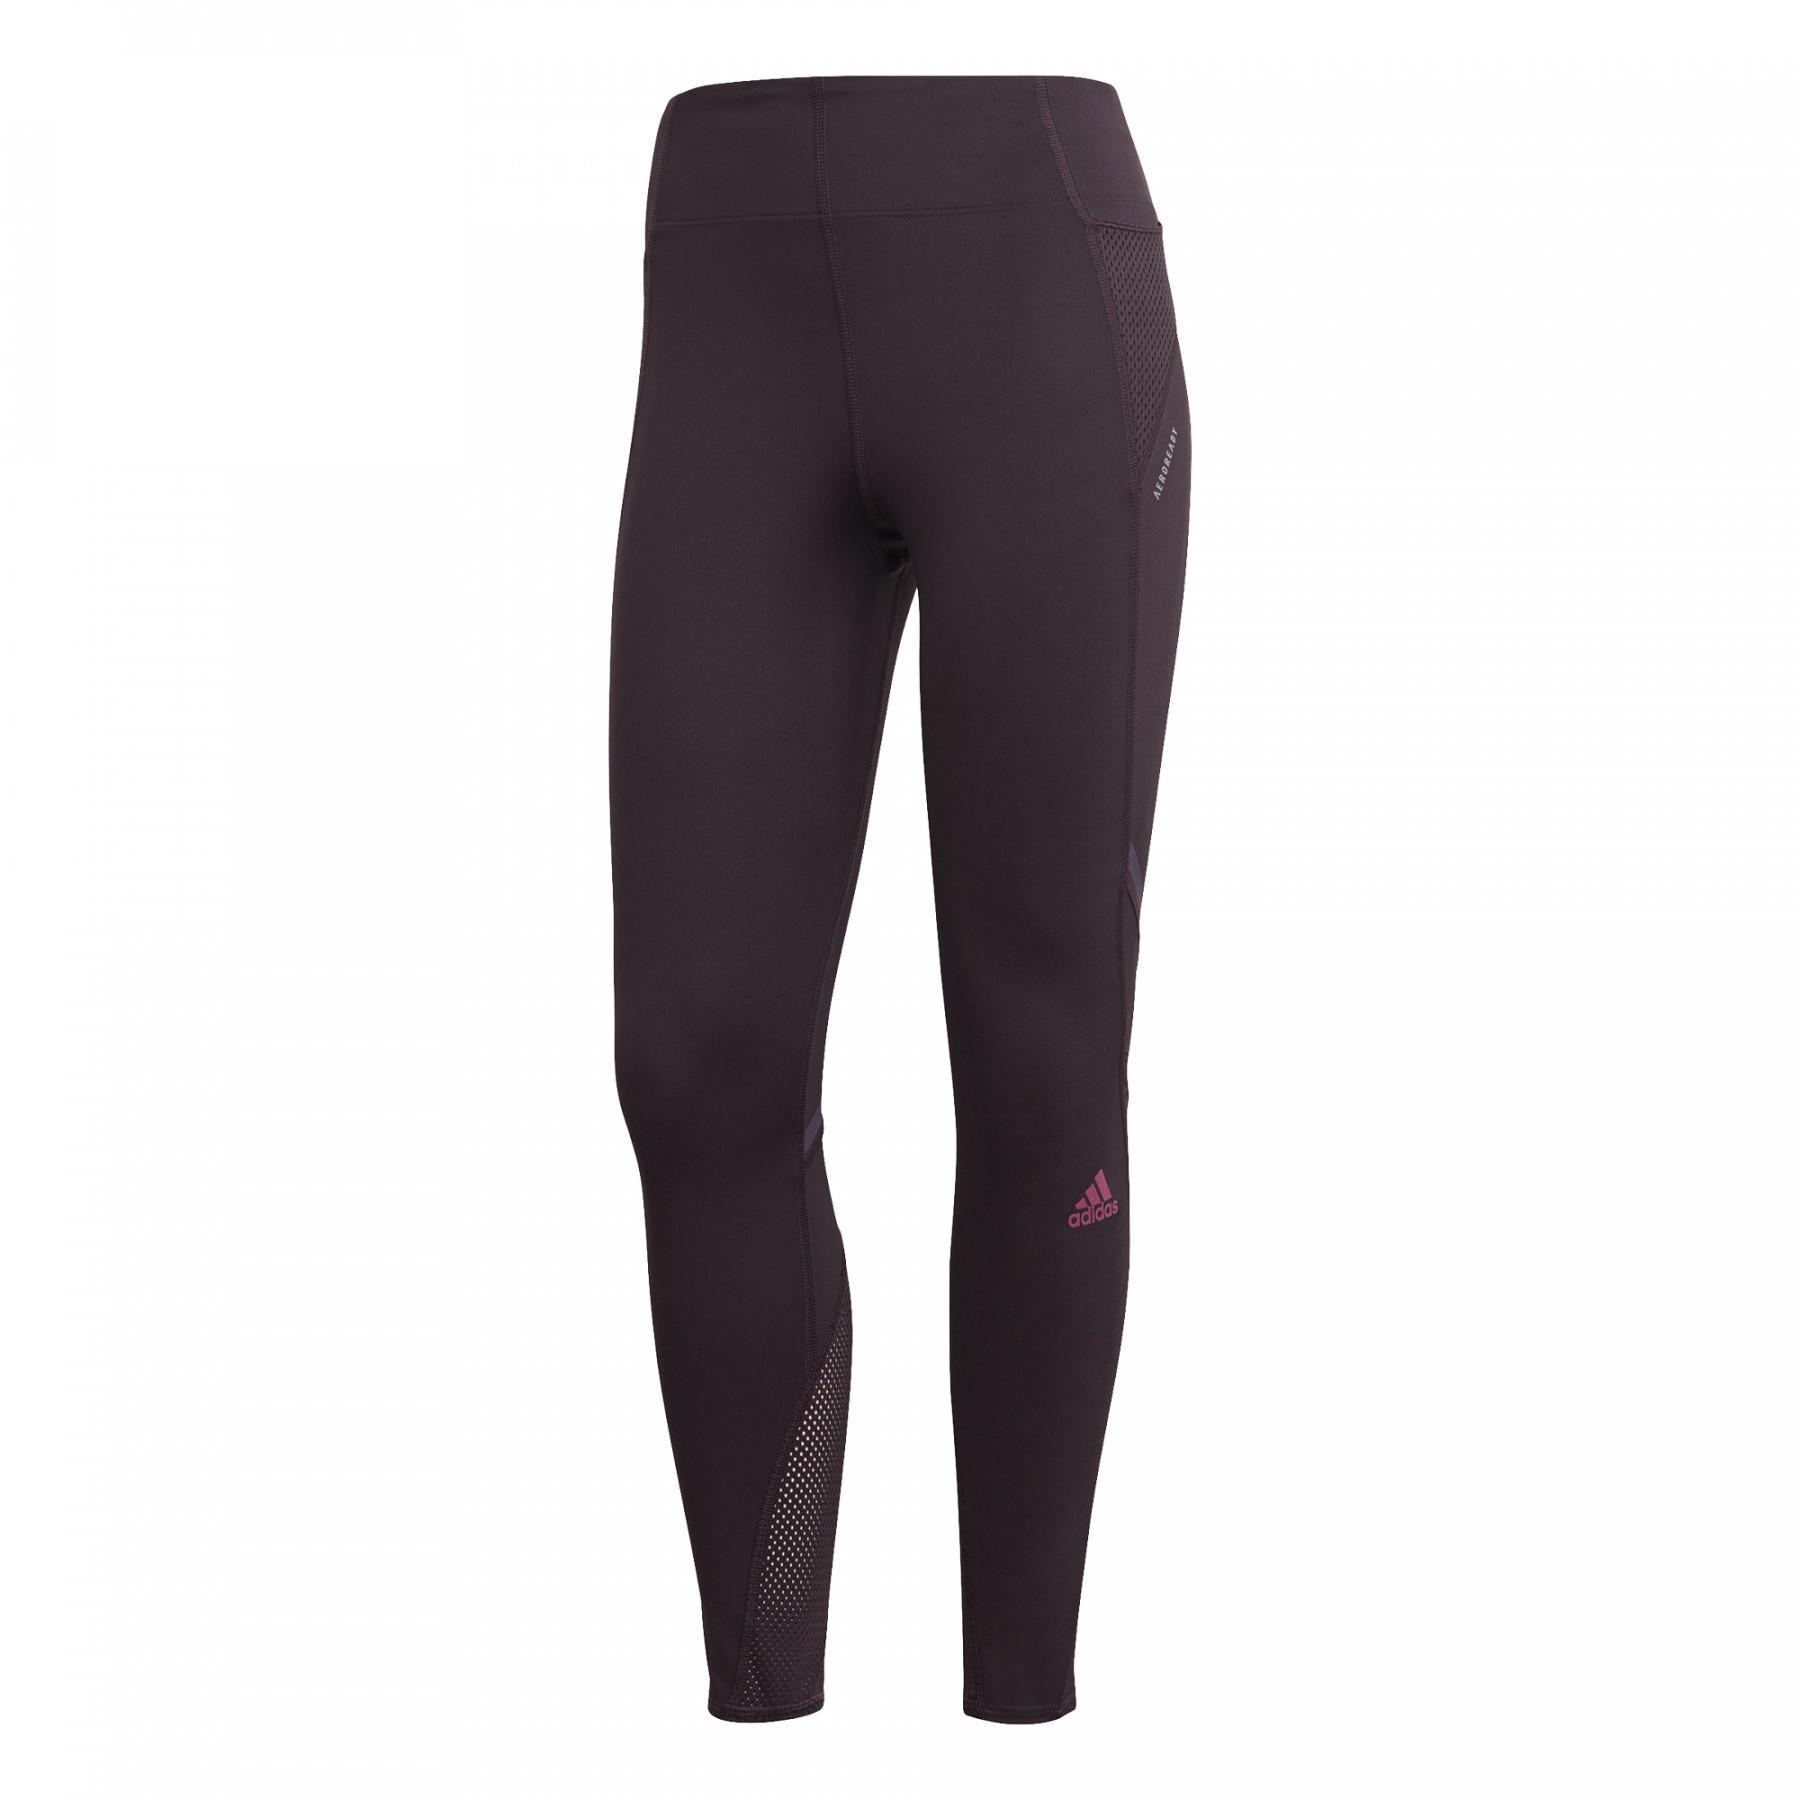 Women's 7/8 tights adidas How We Do